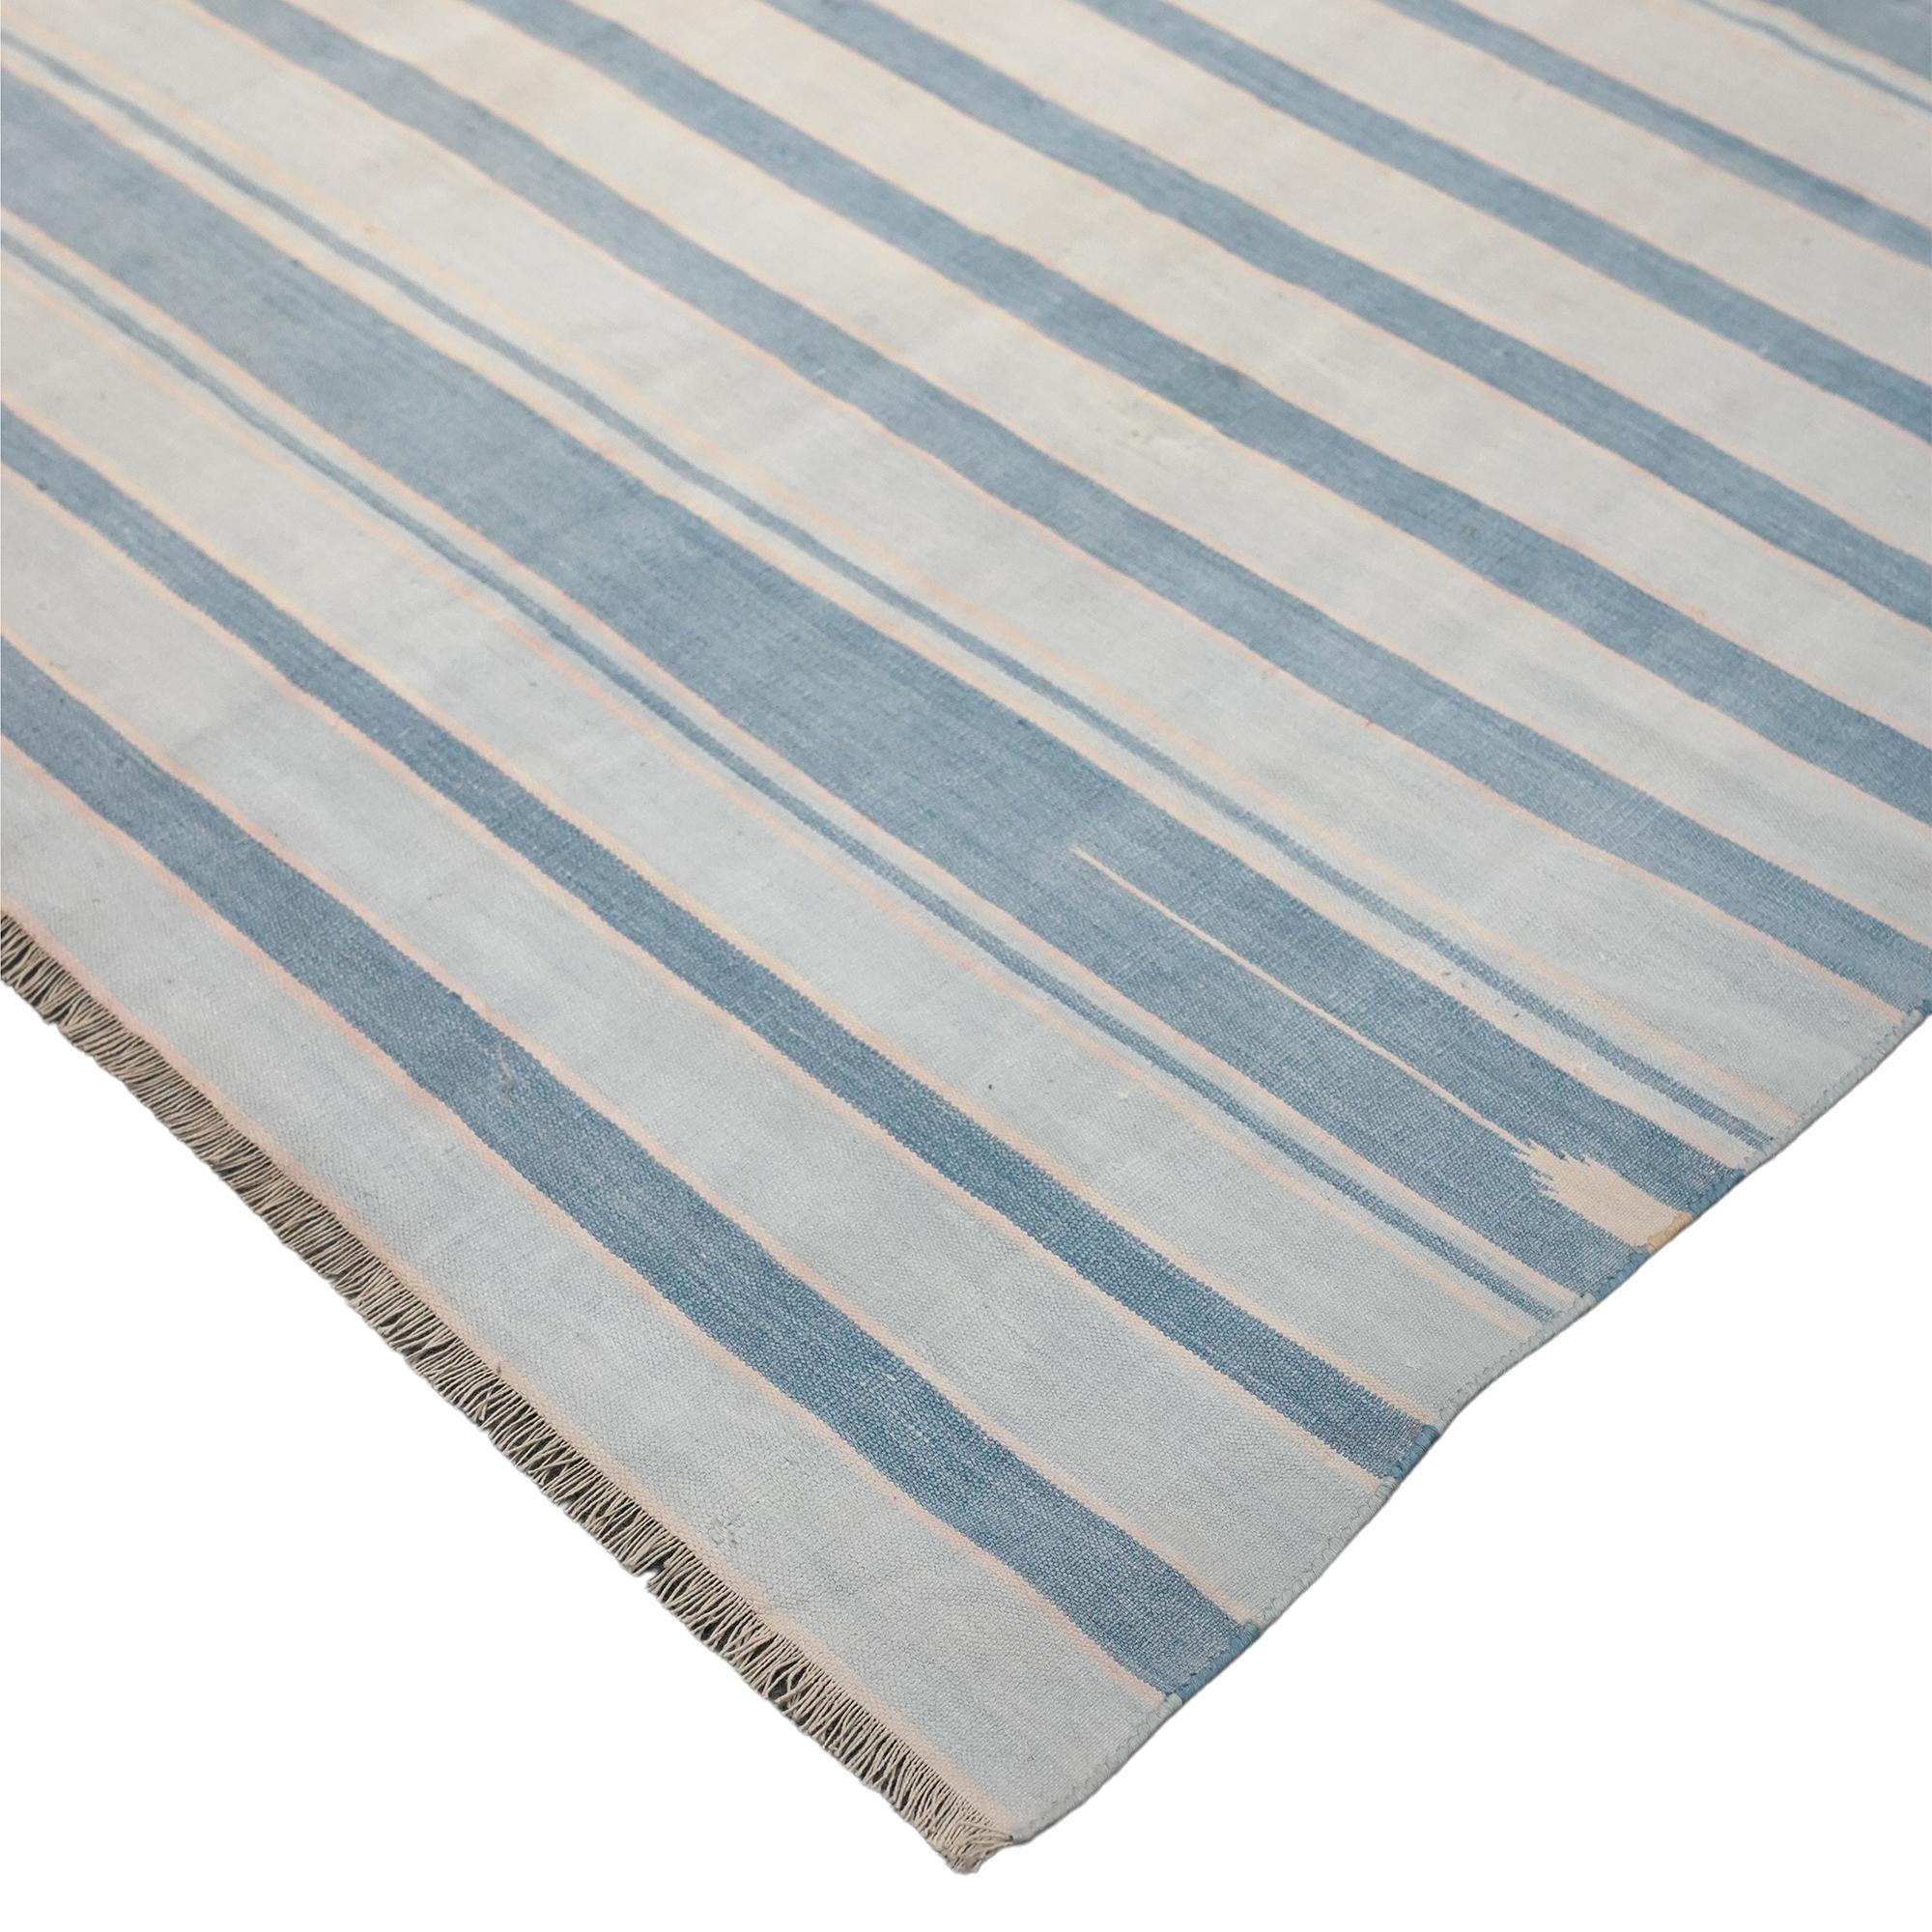 Hand-Woven Vintage Dhurrie Rug, with Blue Geometric Stripes, from Rug & Kilim For Sale